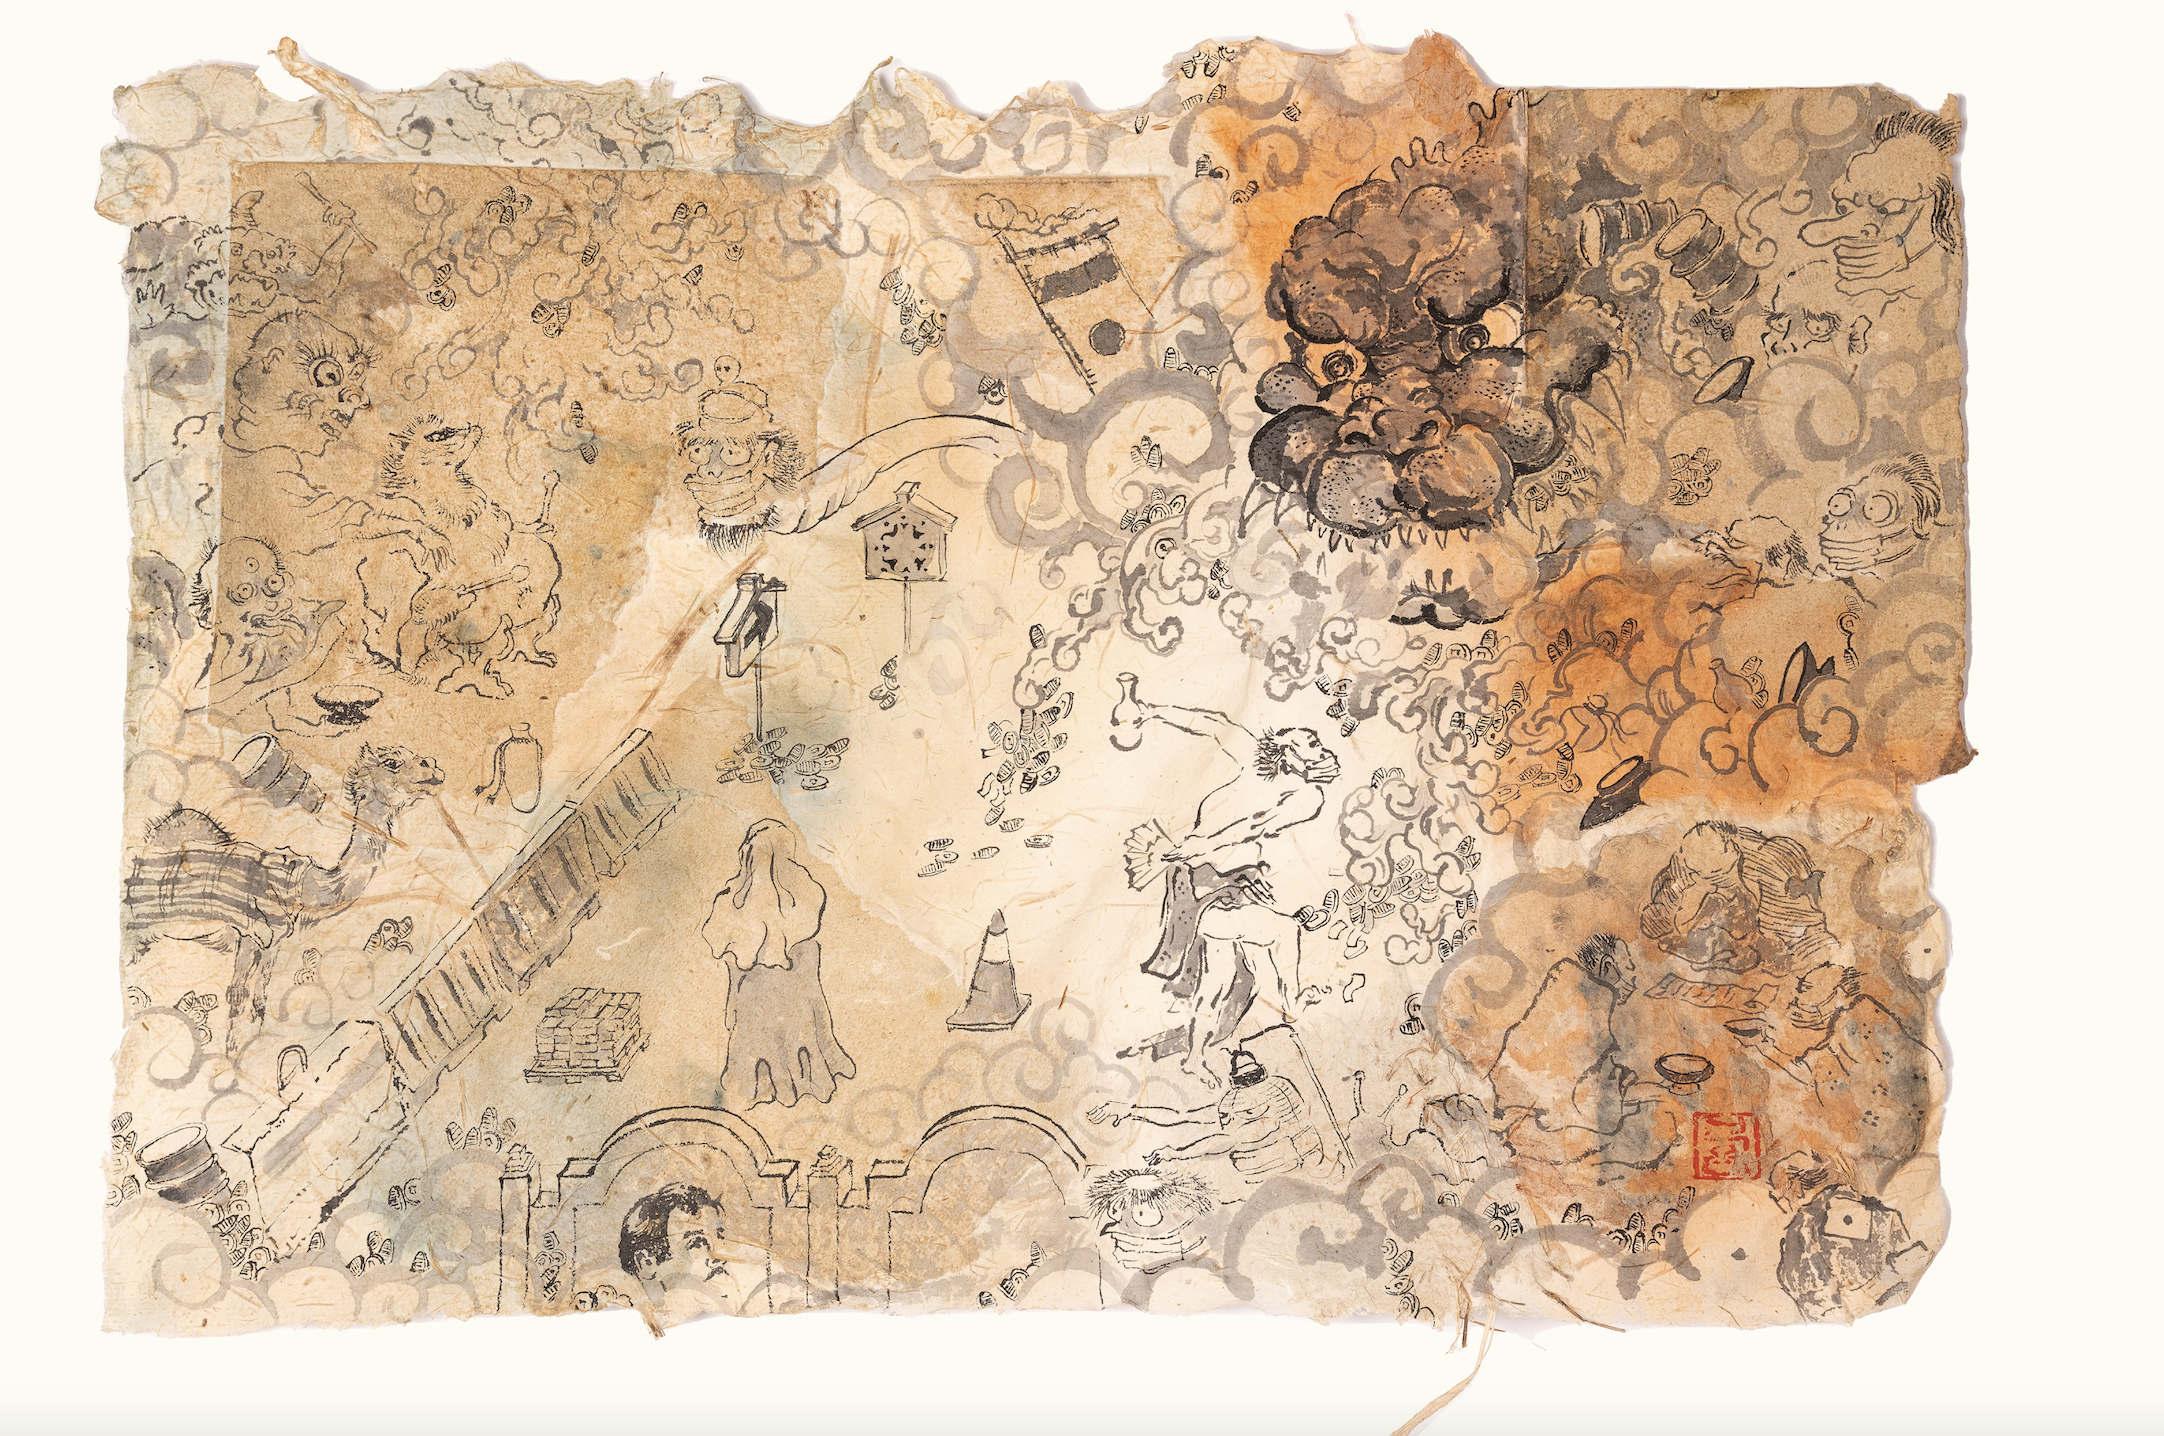 Artwork painted in ink on traditional handmade paper, as part of the Dialogue of Paper artist exchange. . 